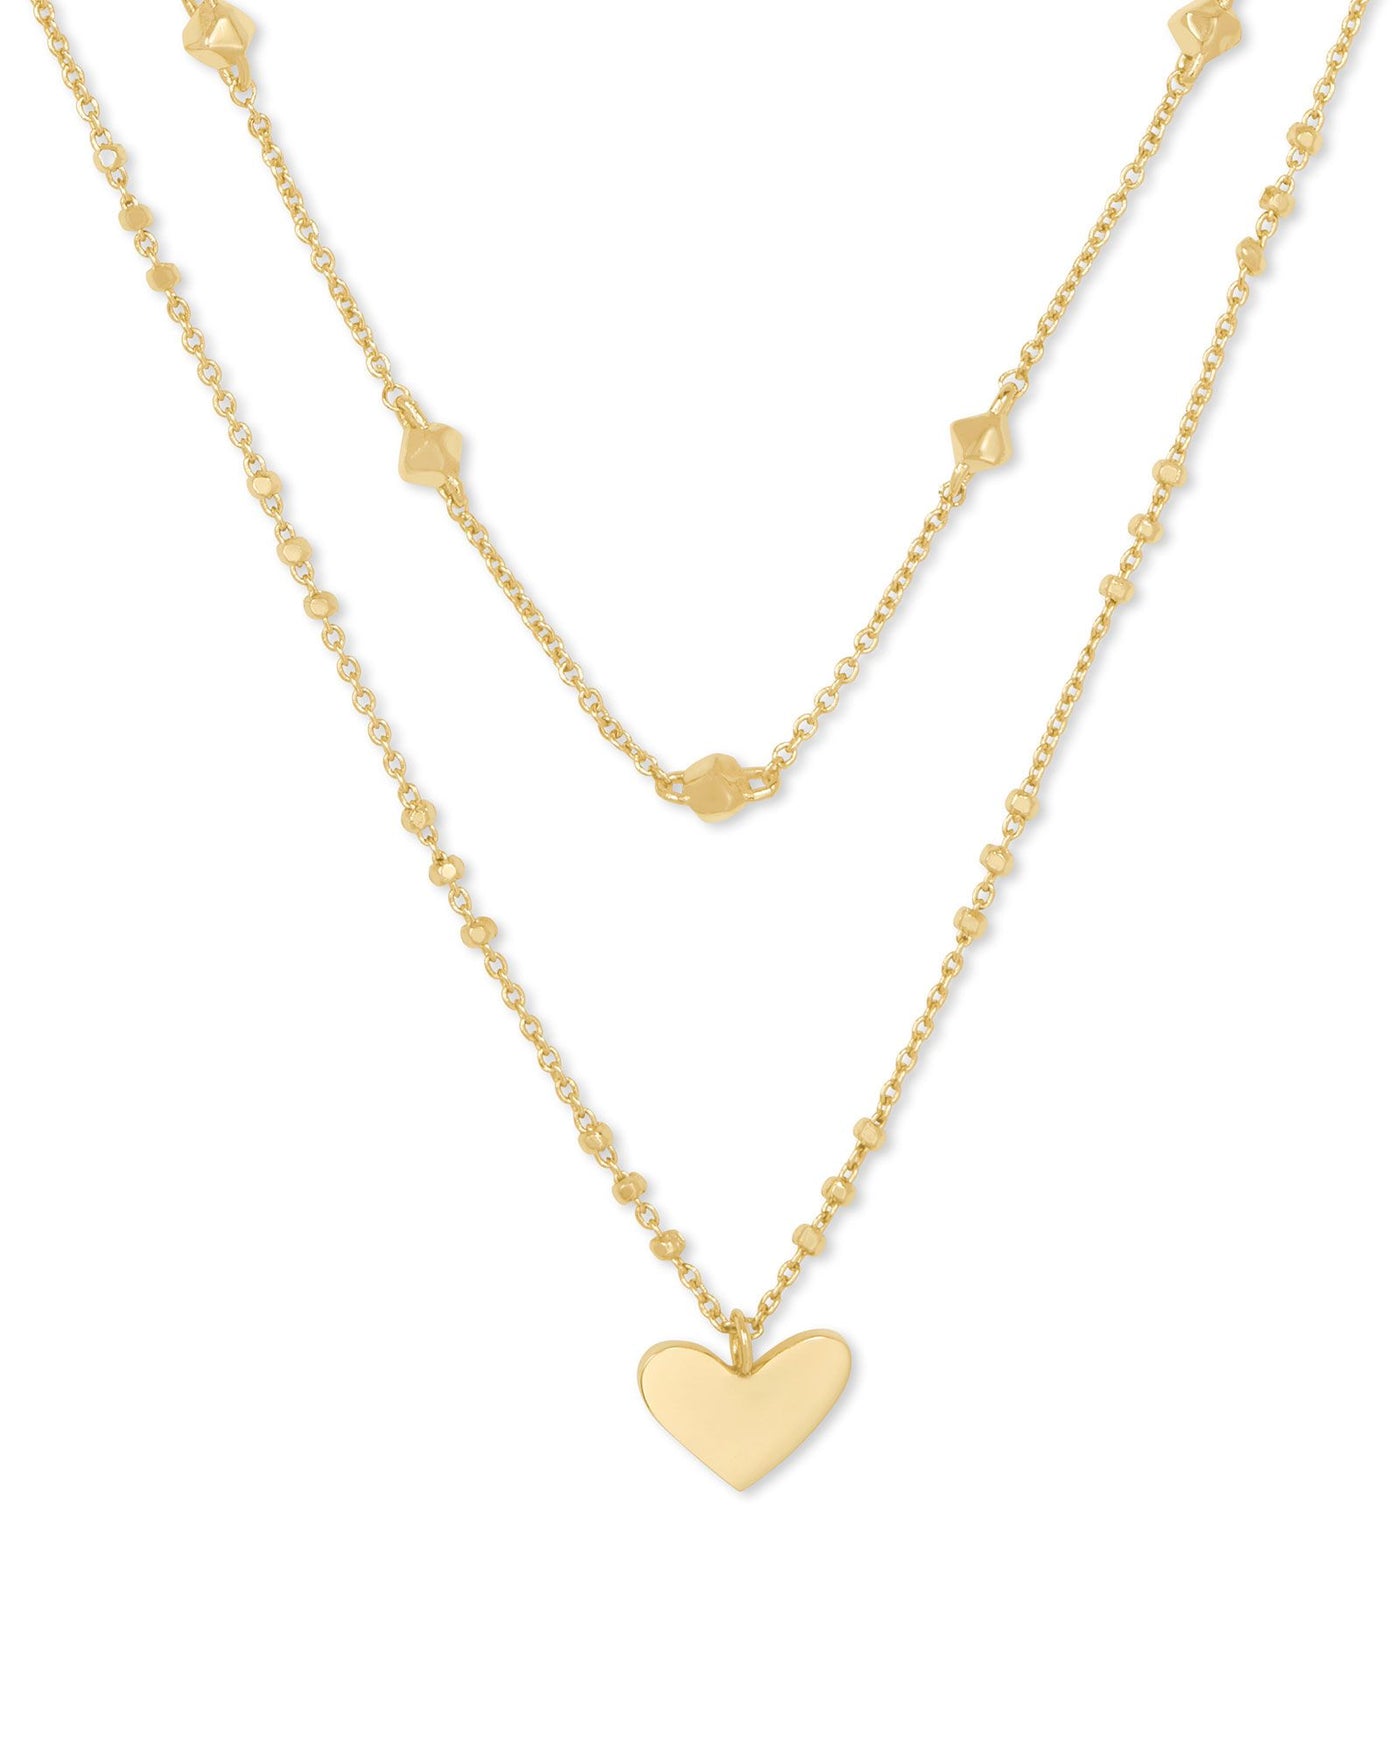 Kendra Scott Ari Heart Multi Strand Necklace-Necklaces-Kendra Scott-Market Street Nest, Fashionable Clothing, Shoes and Home Décor Located in Mabank, TX